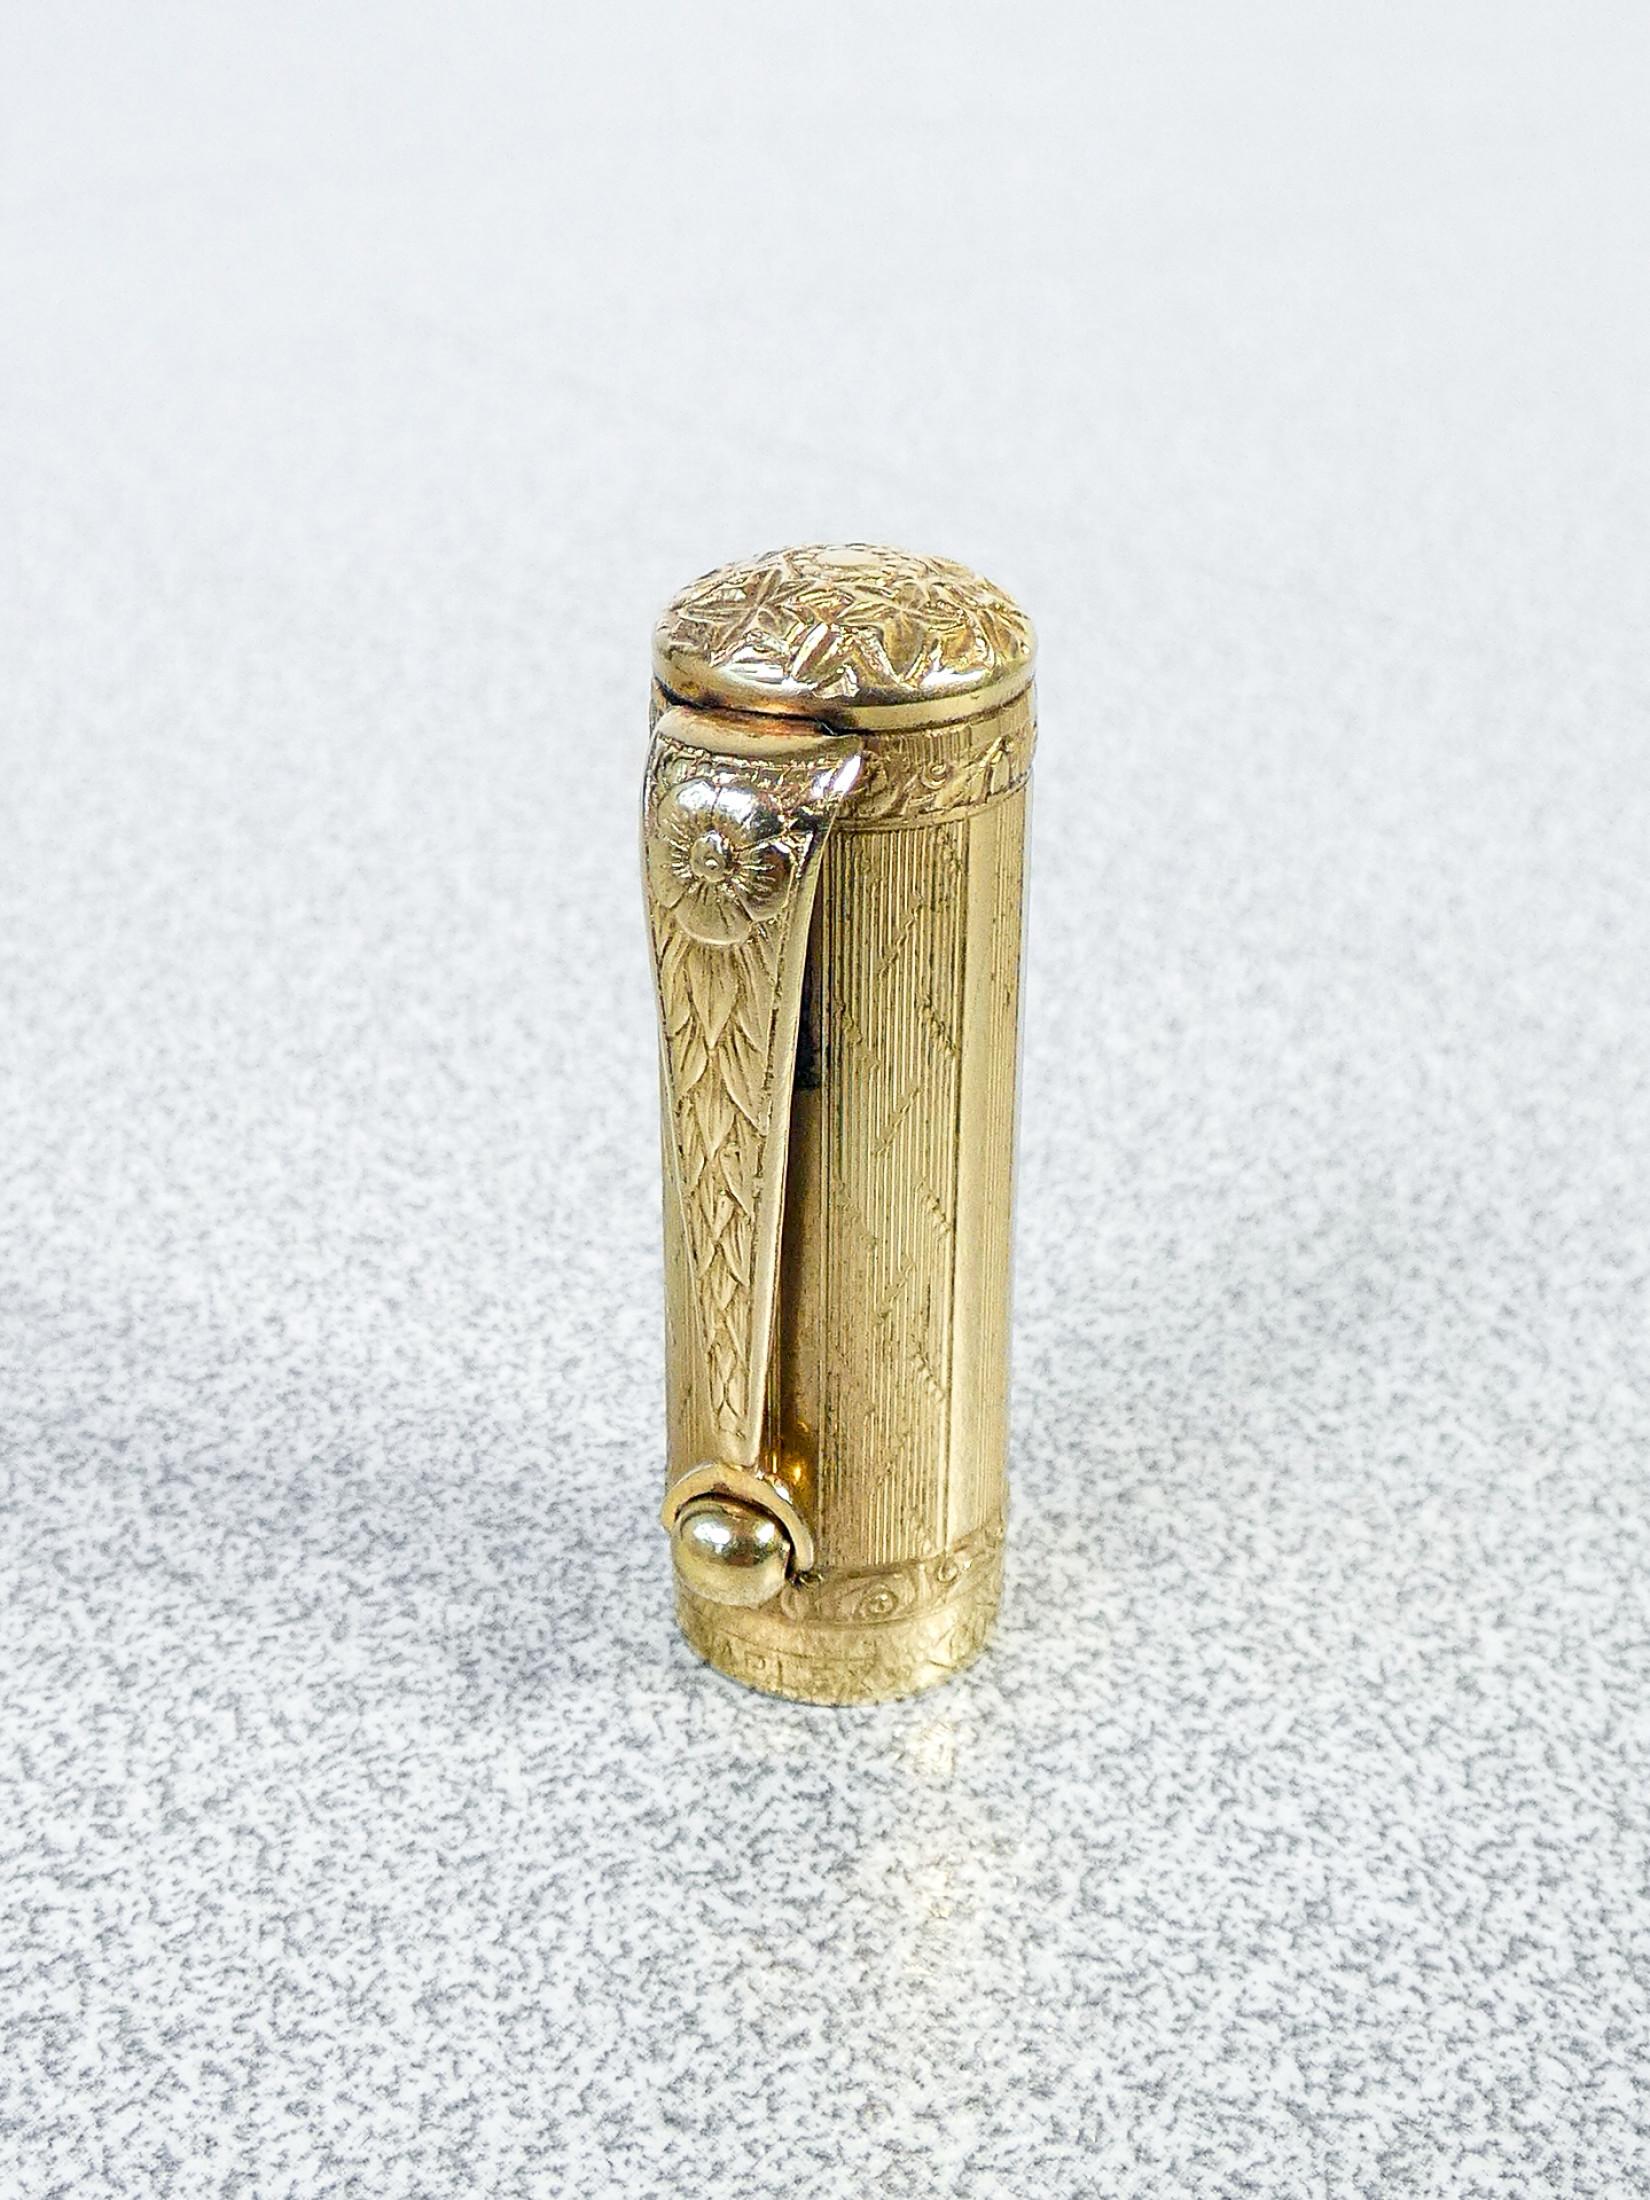 Early 20th Century Safety fountain pen with retractable nib. SIMPLEX, gold laminated. 1920s